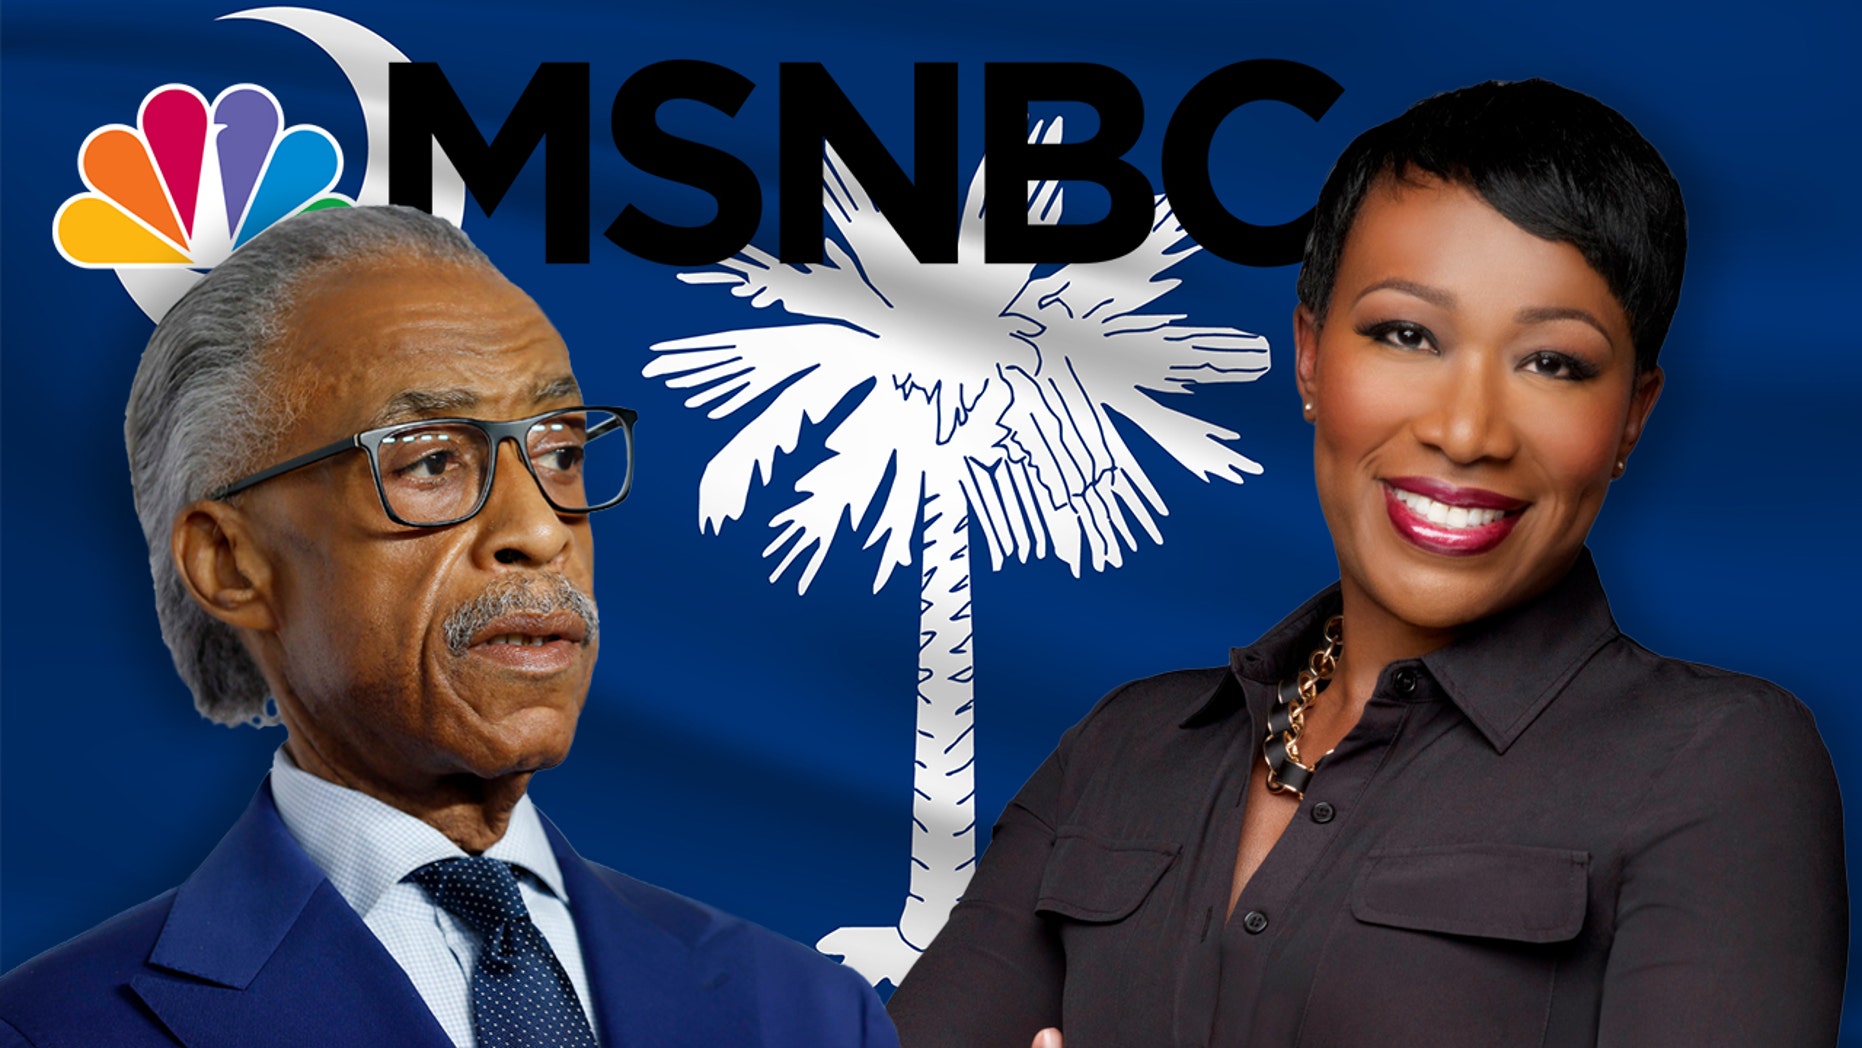 The South Carolina Democratic Party will allow MSNBC pundits Al Sharpton and Joy Reid exclusive access to 2020 presidential hopefuls.